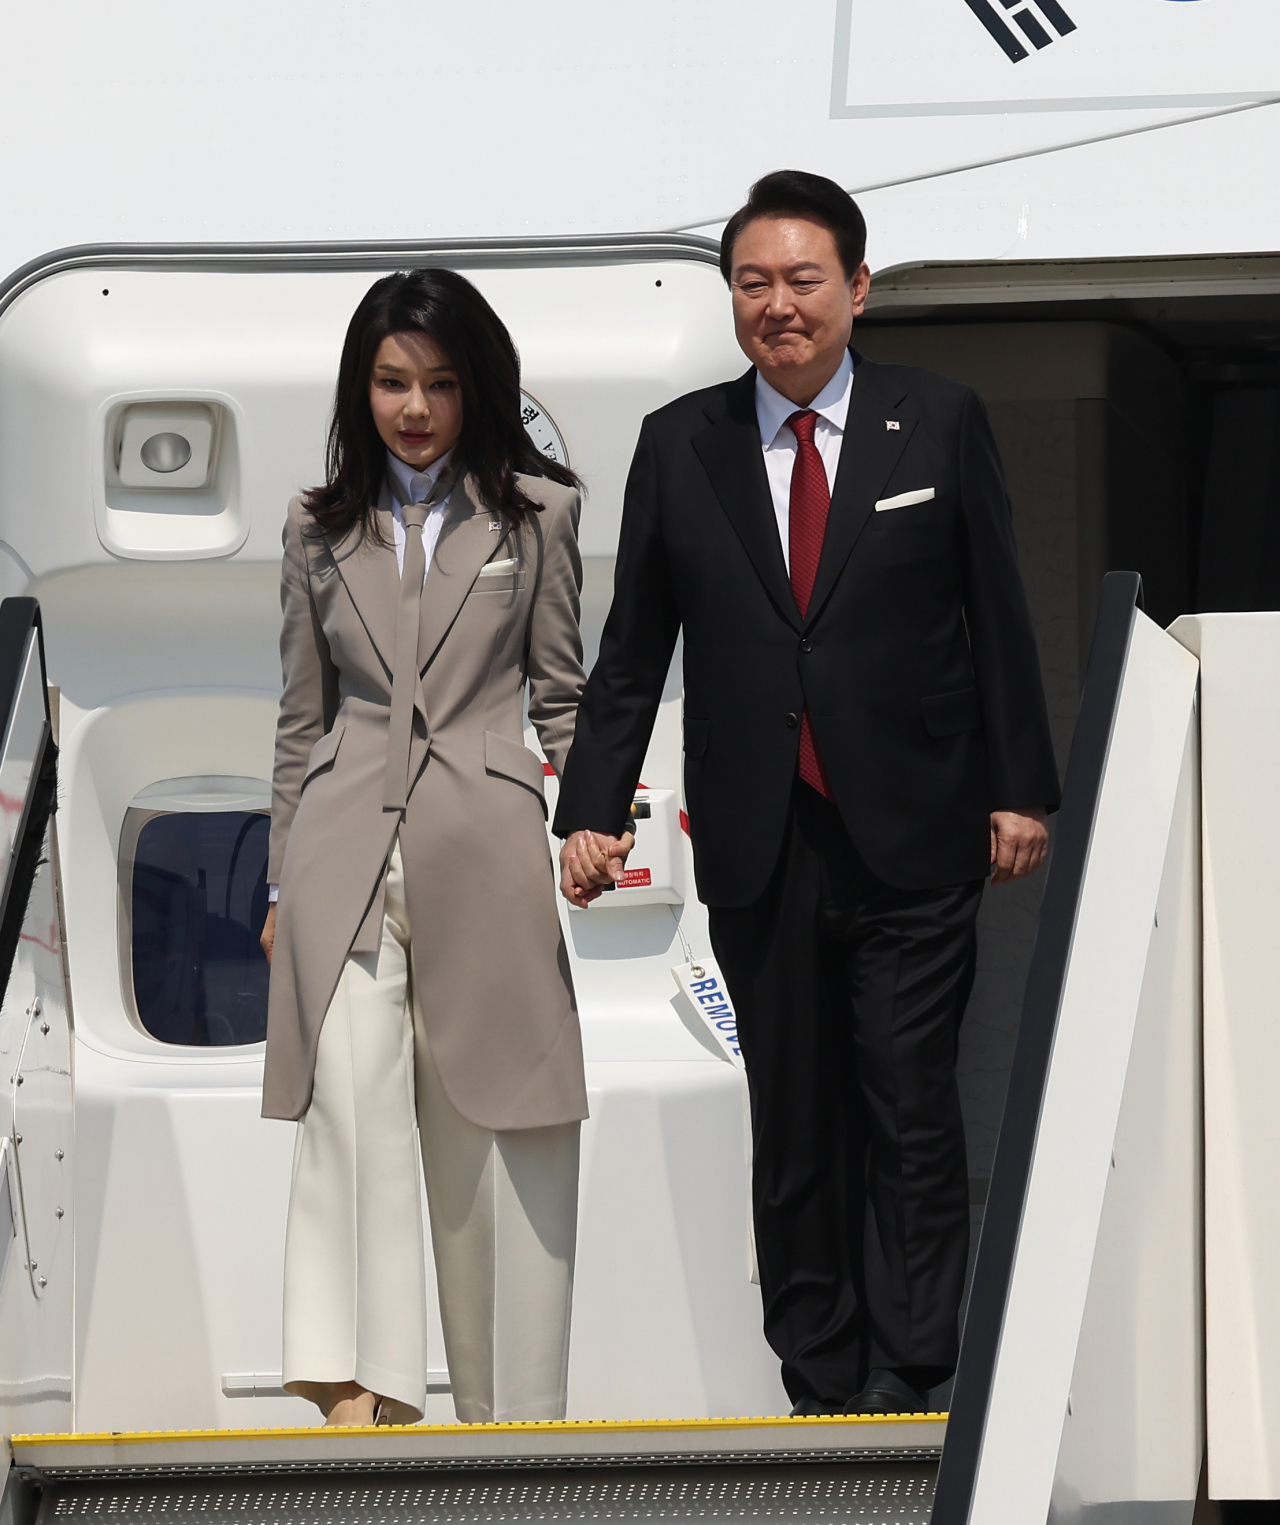 President Yoon Suk Yeol (right) and first lady Kim Keon Hee arrive at Tokyo International Airport in Tokyo, Japan on Thursday for a two-day summit with Prime Minister Fumio Kishida. (Yonhap)